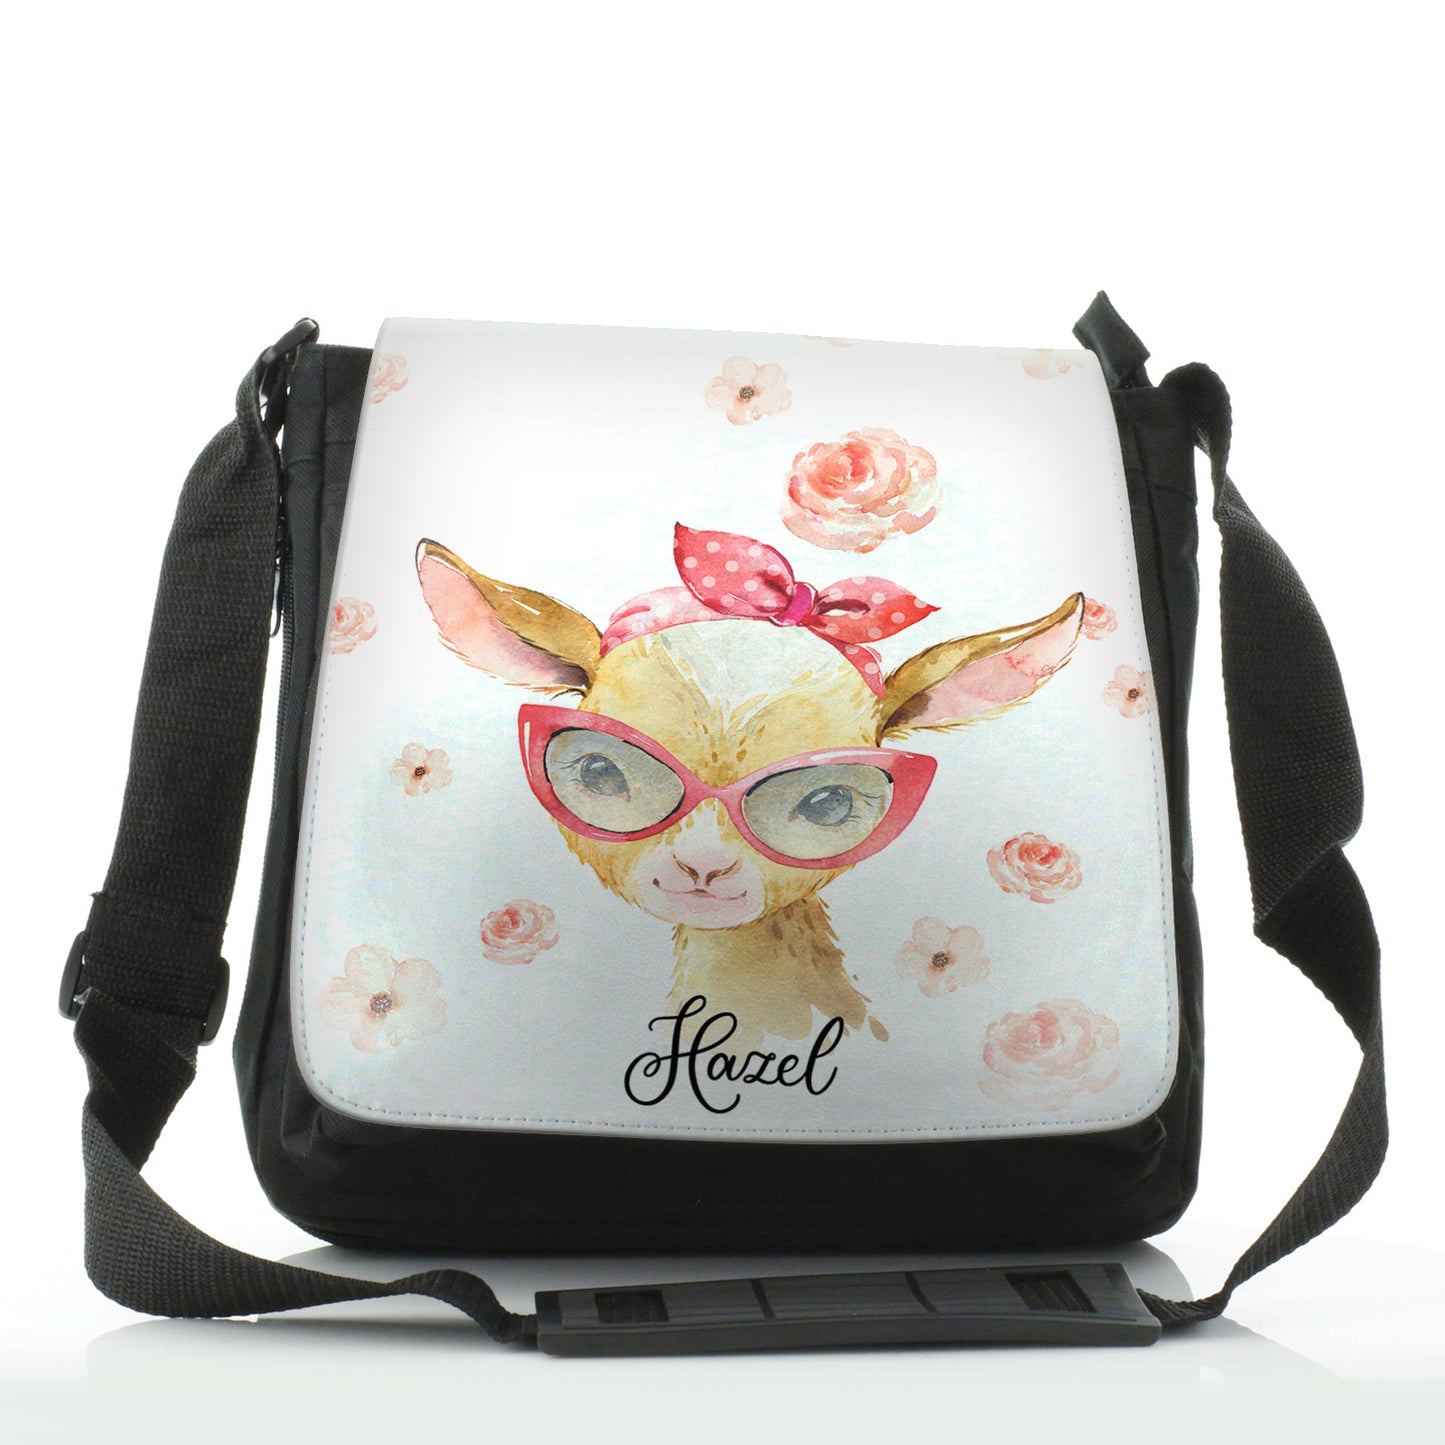 Personalised Shoulder Bag with Goat Pink Glasses and Roses and Cute Text